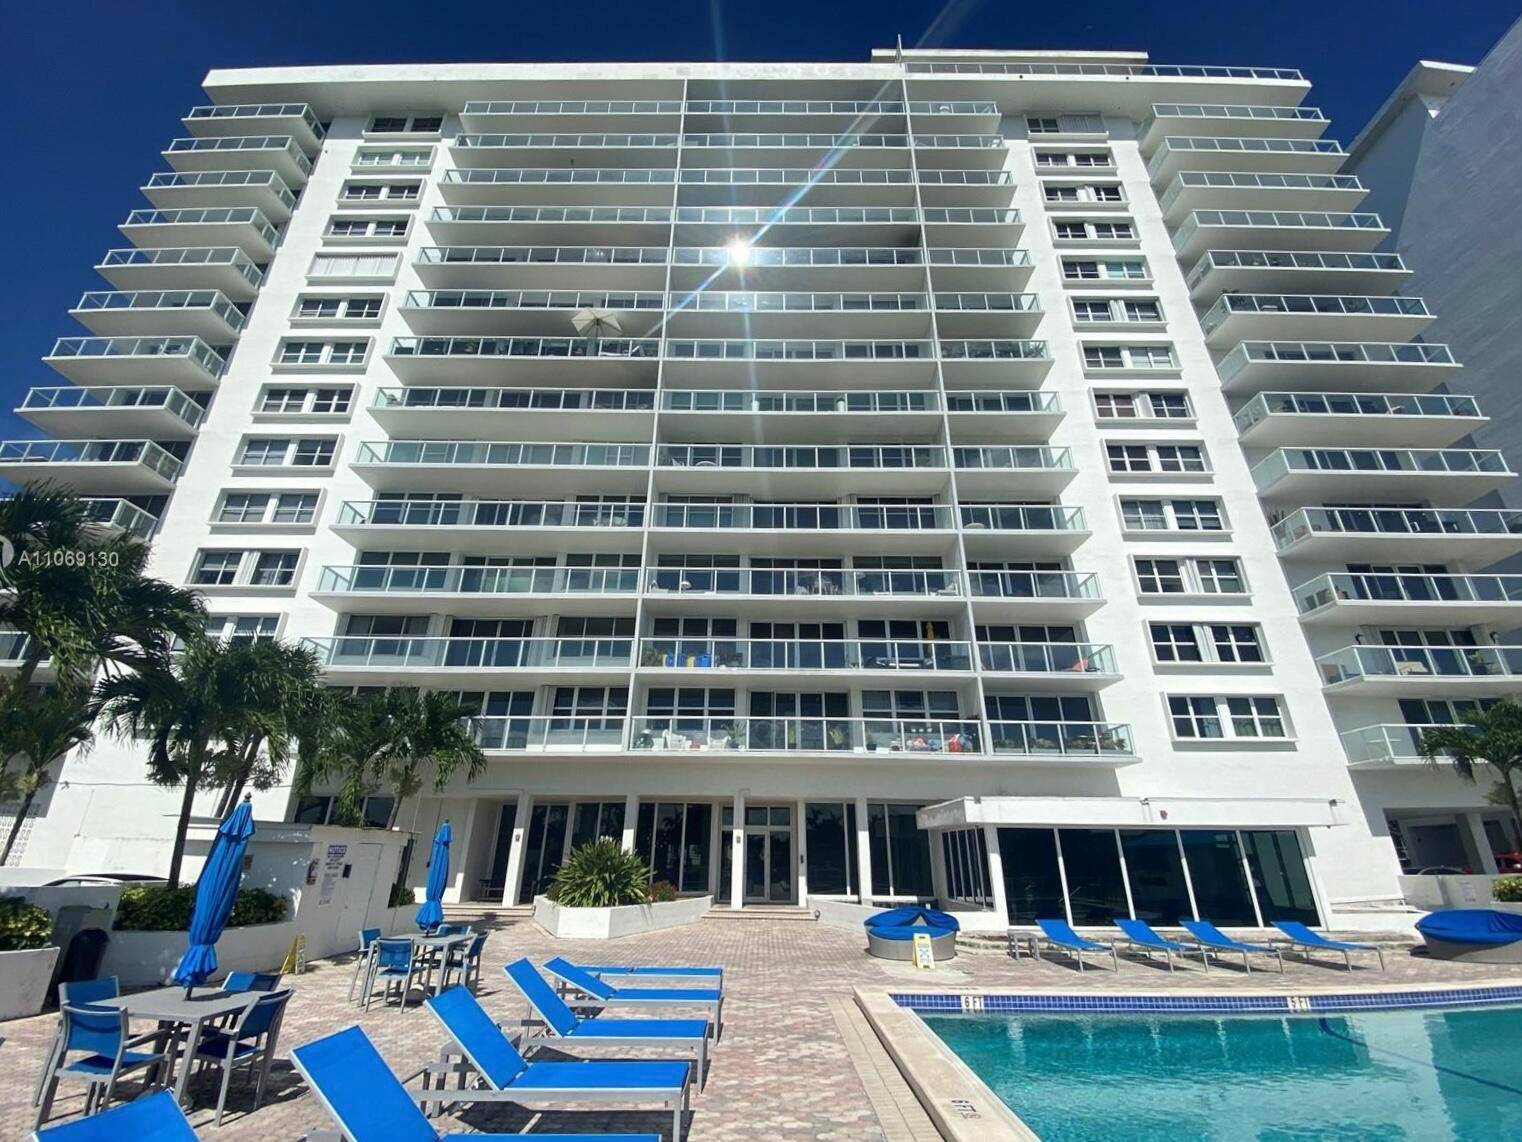 Luxurious corner apartment completely remodeled furnished or unfurnished, new stainless steel appliances with impact windows and doors, a wonderful ocean view and Intracoastal view just a few steps from the ...